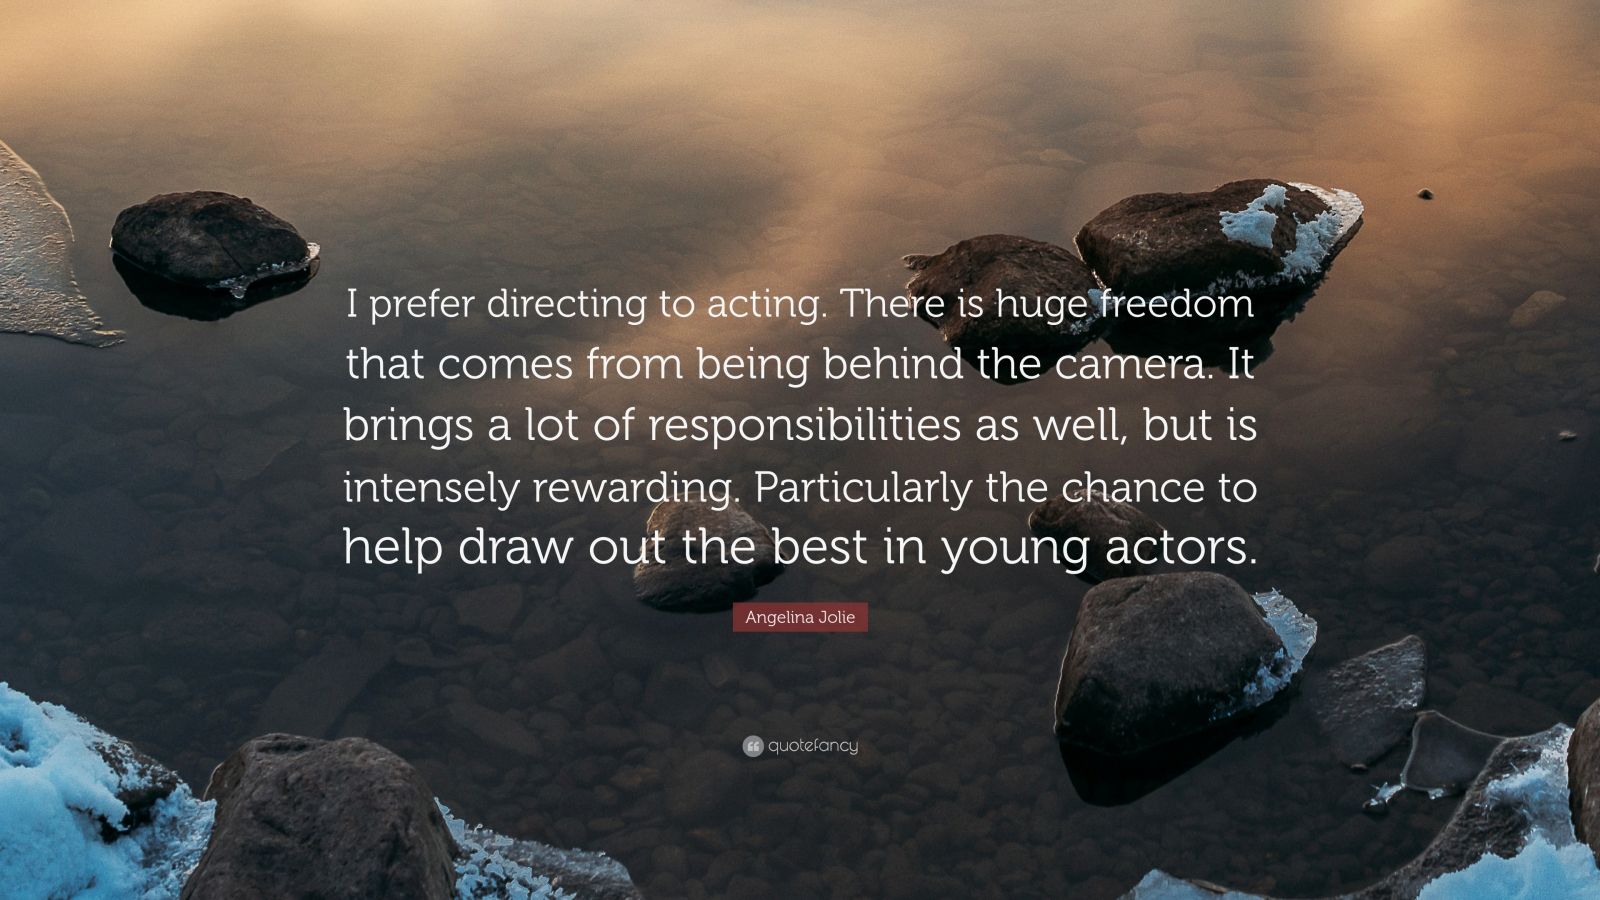 Angelina Jolie Quote: "I prefer directing to acting. There ...